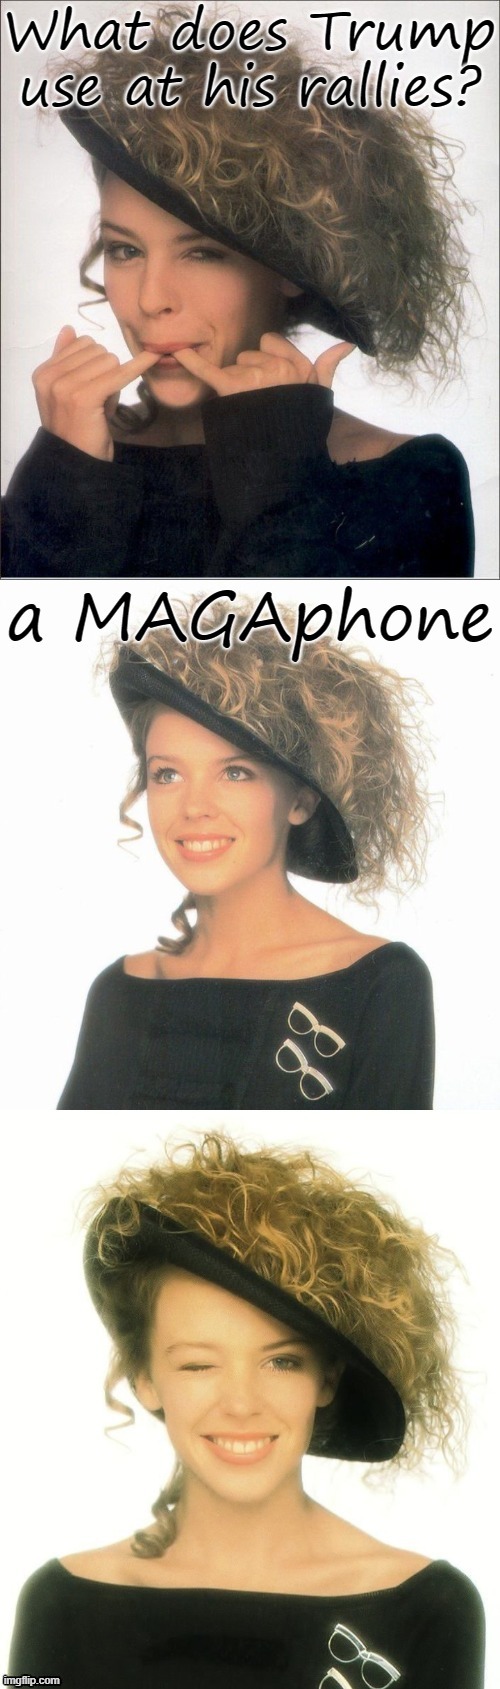 Bad Pun Kylie Minogue hat. With example joke! :) | image tagged in bad pun,bad puns,maga,megaphone,new template,custom template | made w/ Imgflip meme maker